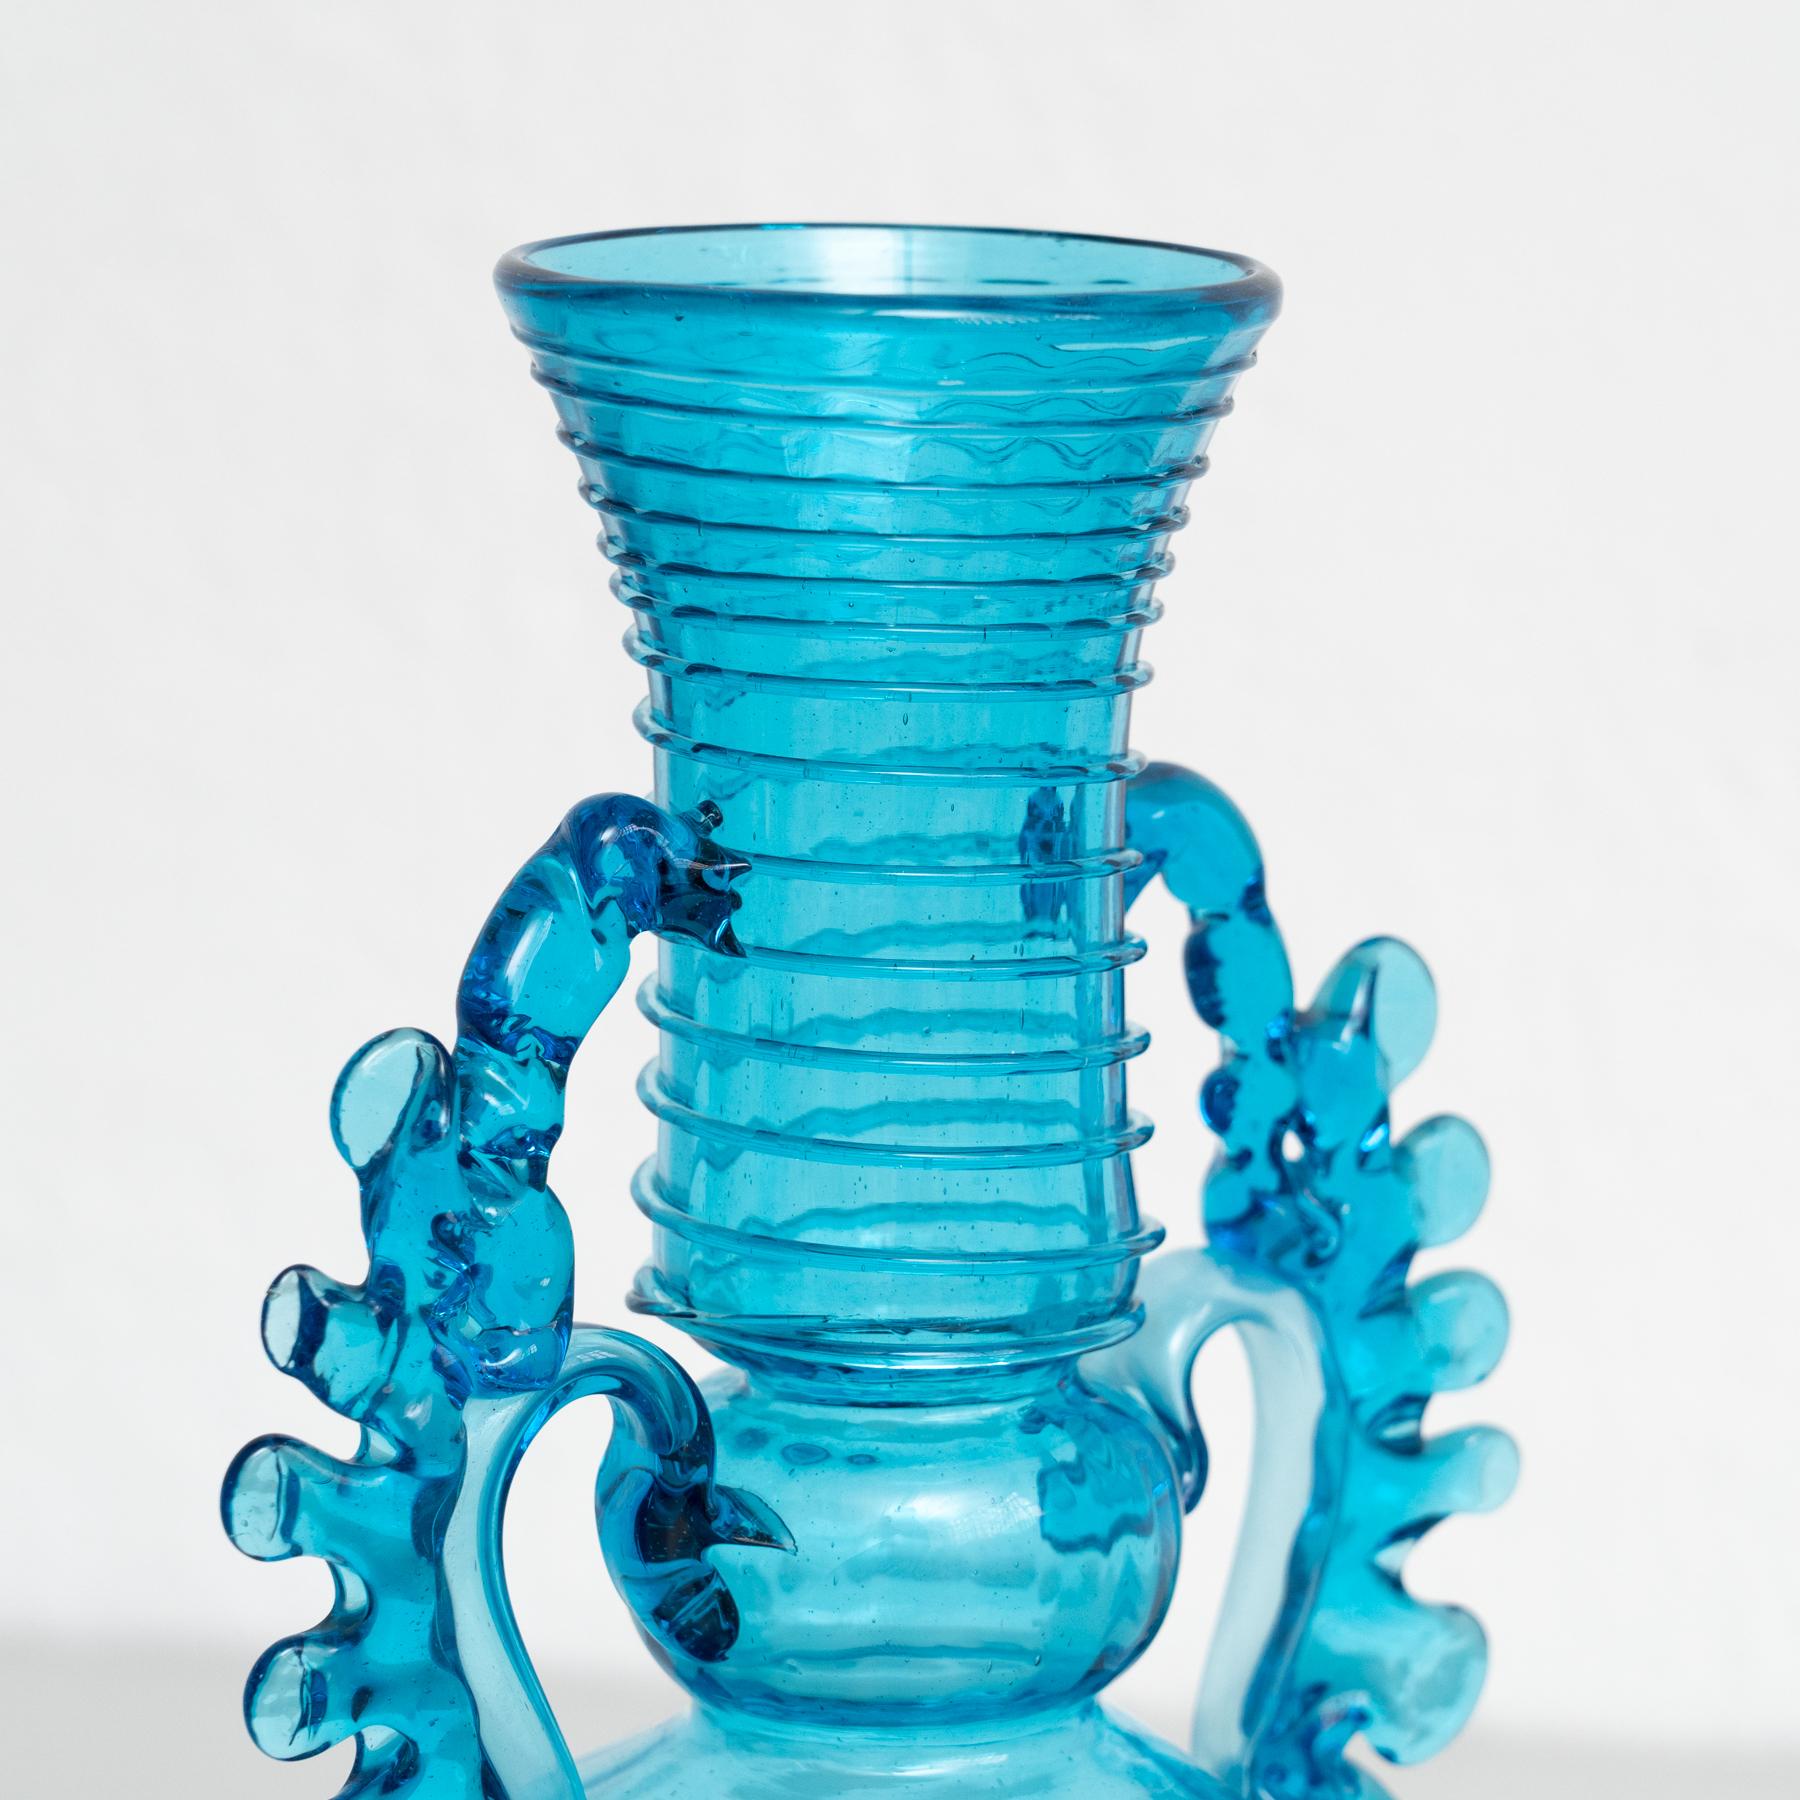 Exceptional Blown Glass Vase - Early XXth Century - Spanish Craftsmanship For Sale 2